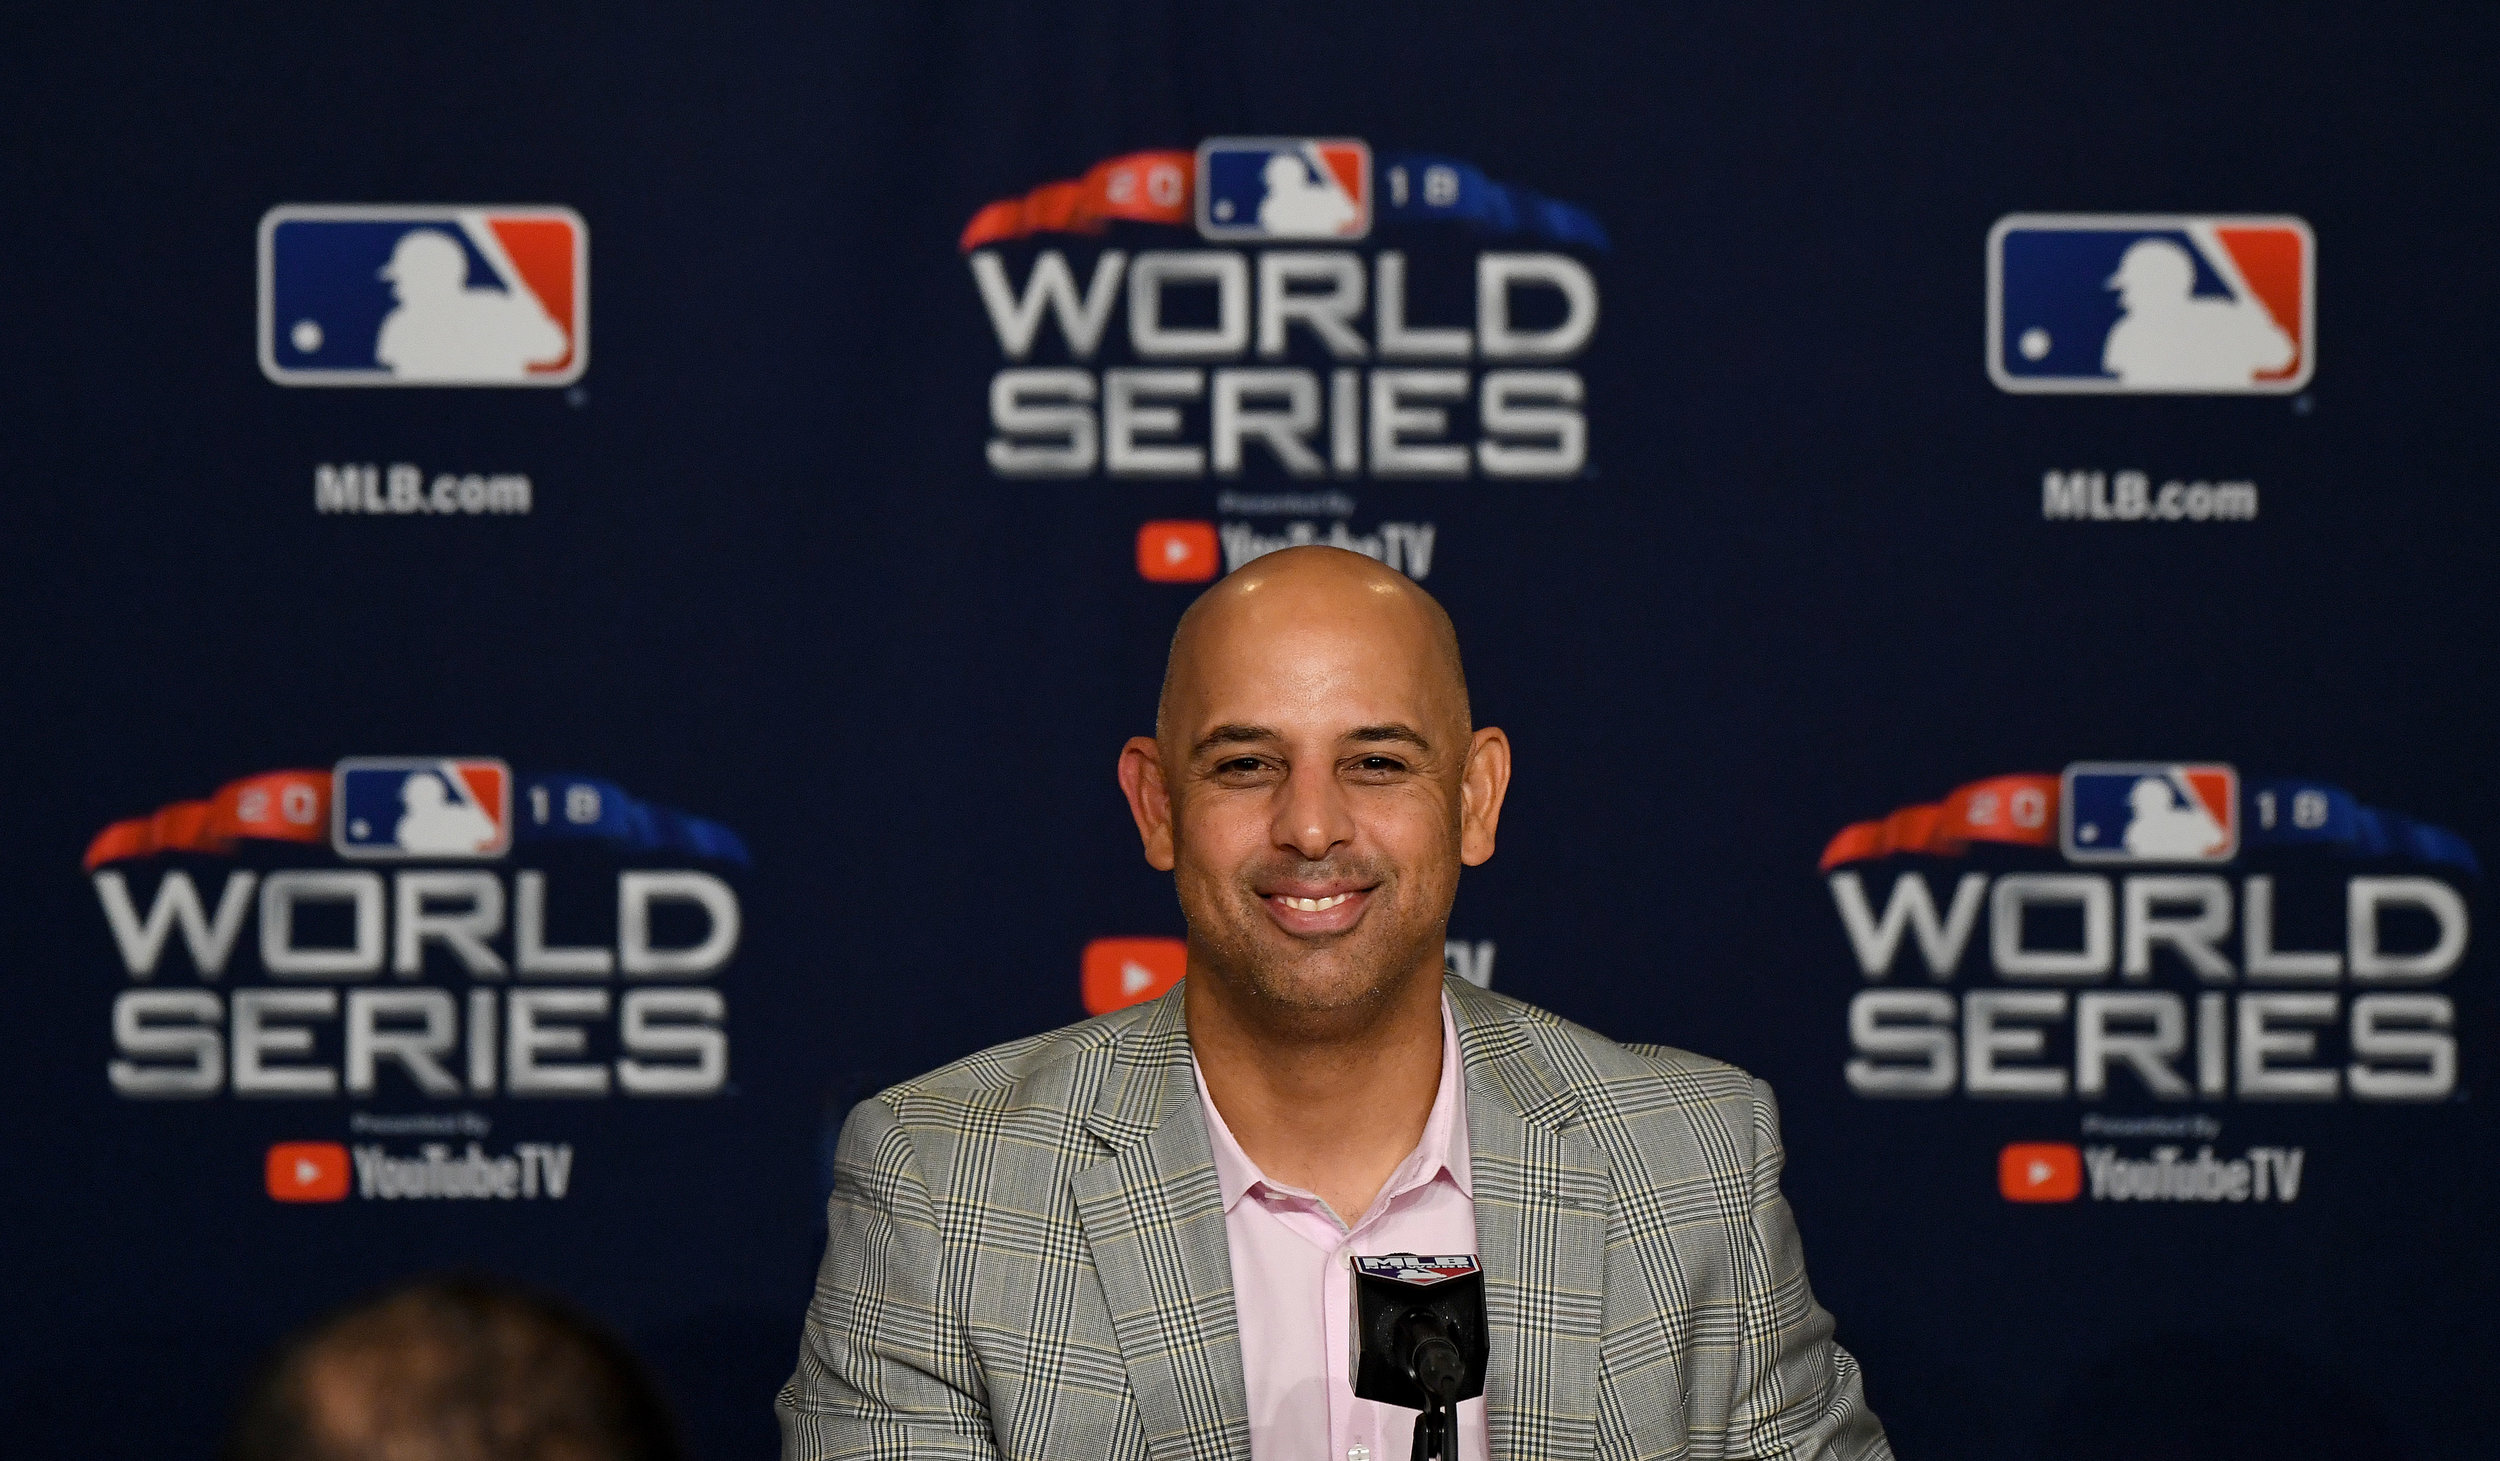  Boston Red Sox manager Alex Cora speaks to the media during a press conference prior to game three of the World Series at Dodger Stadium on Thursday, October 25, 2018 in Los Angeles, California.  